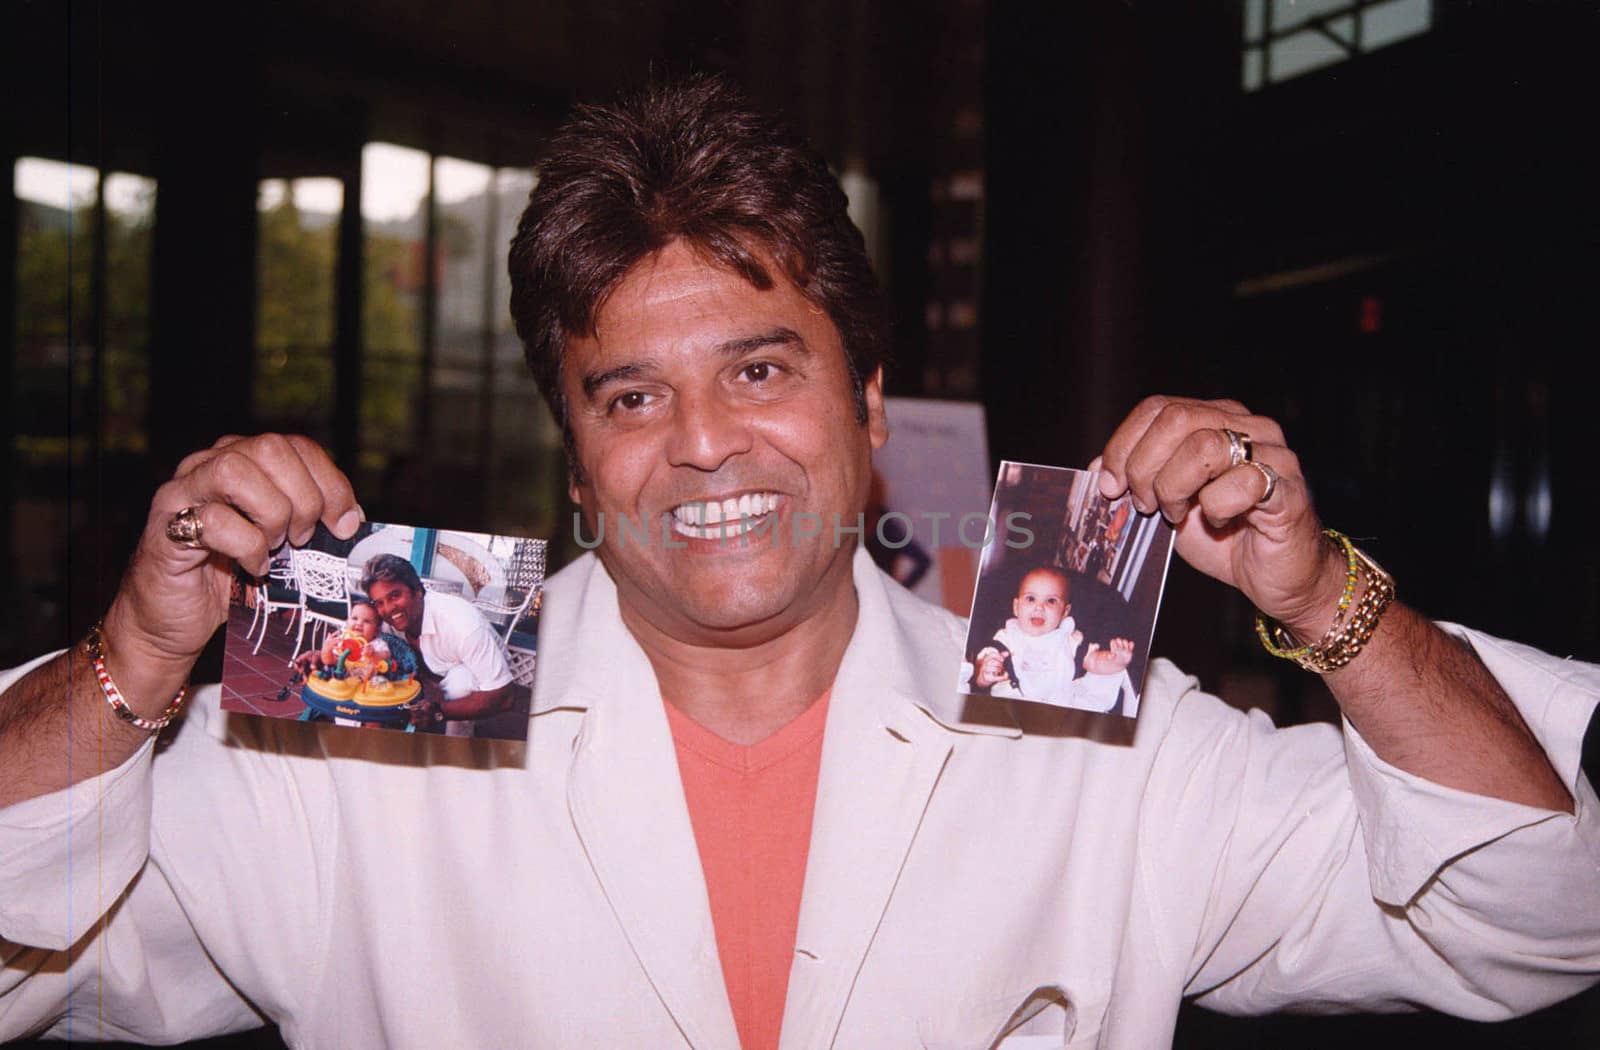 Eric Estrada at the premiere of the TNT movie Running Mates. 08-01-00